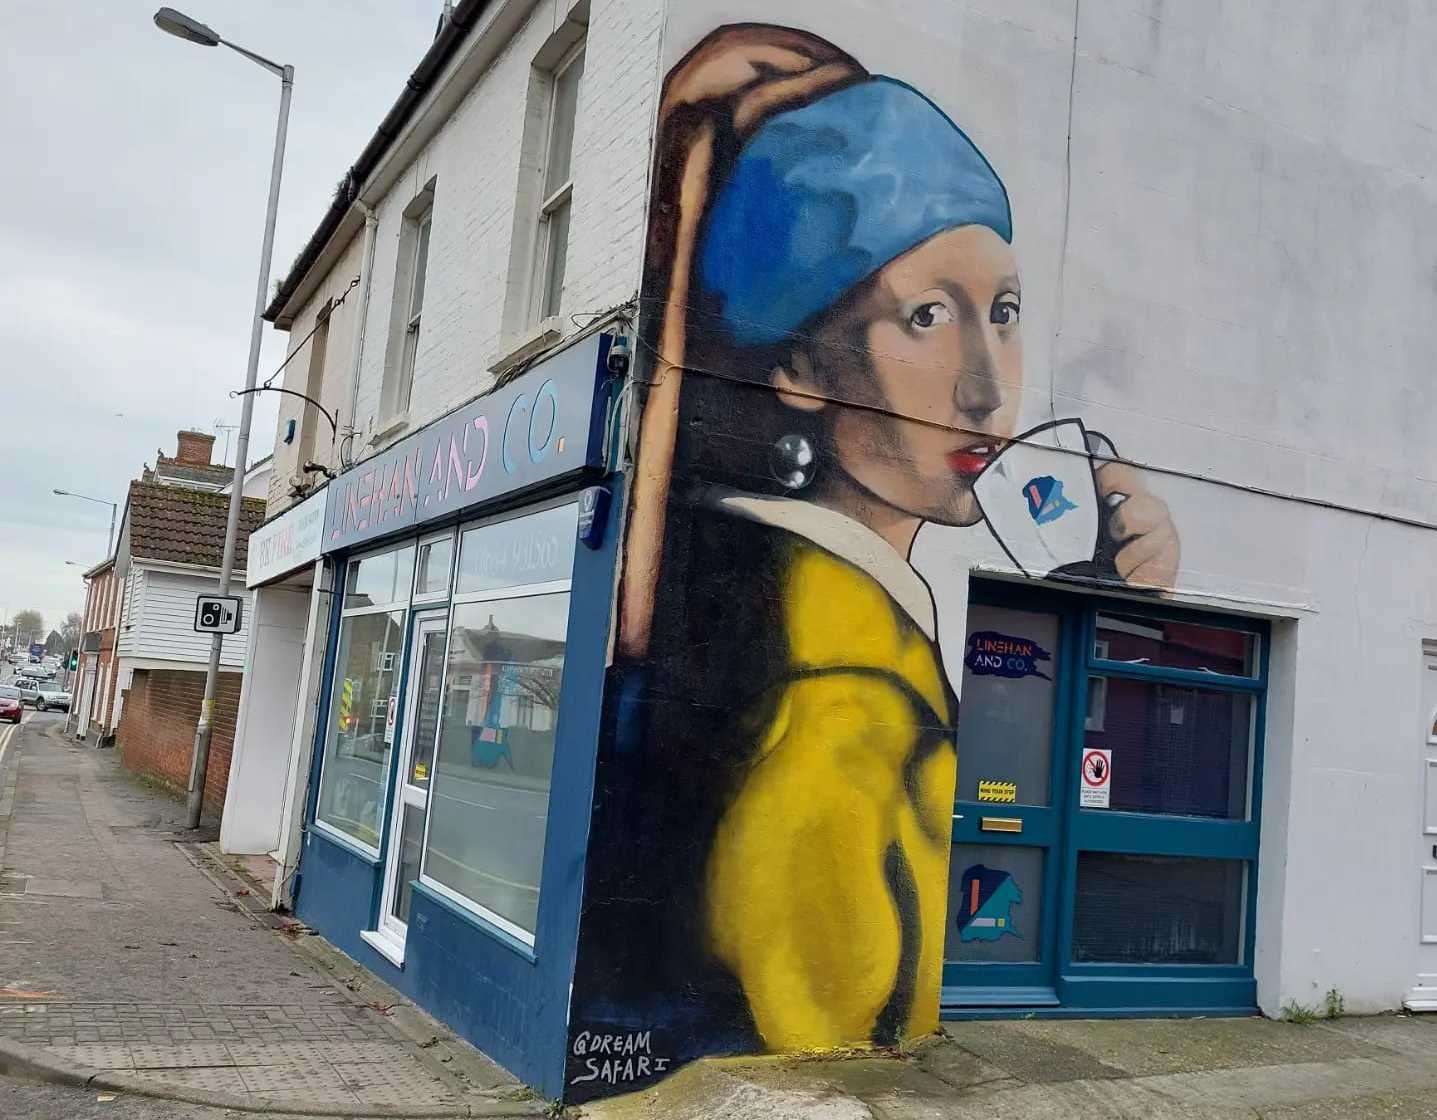 The new mural at Lineham and Co